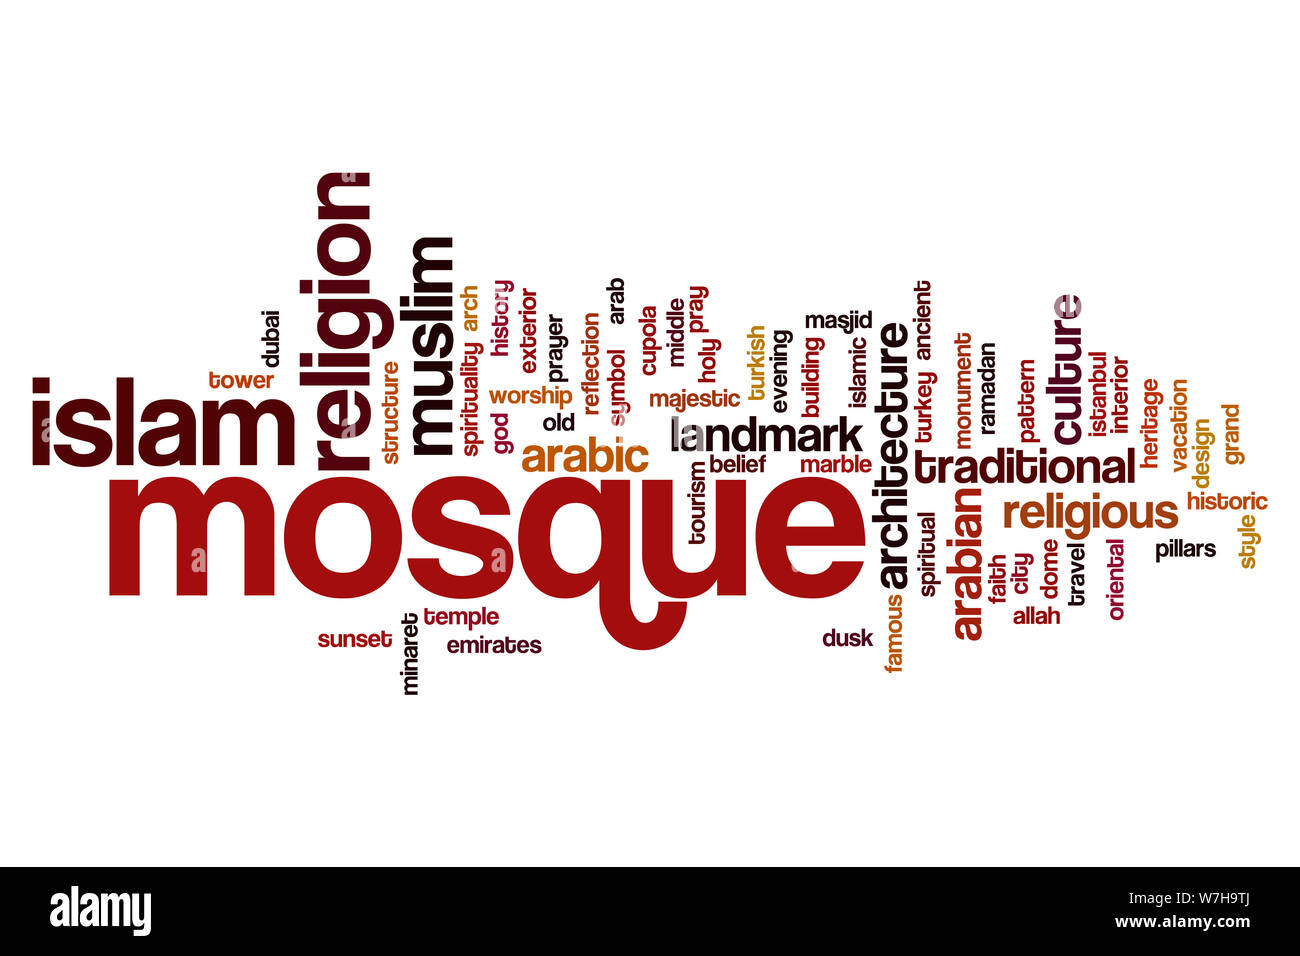 Mosque word cloud concept Stock Photo